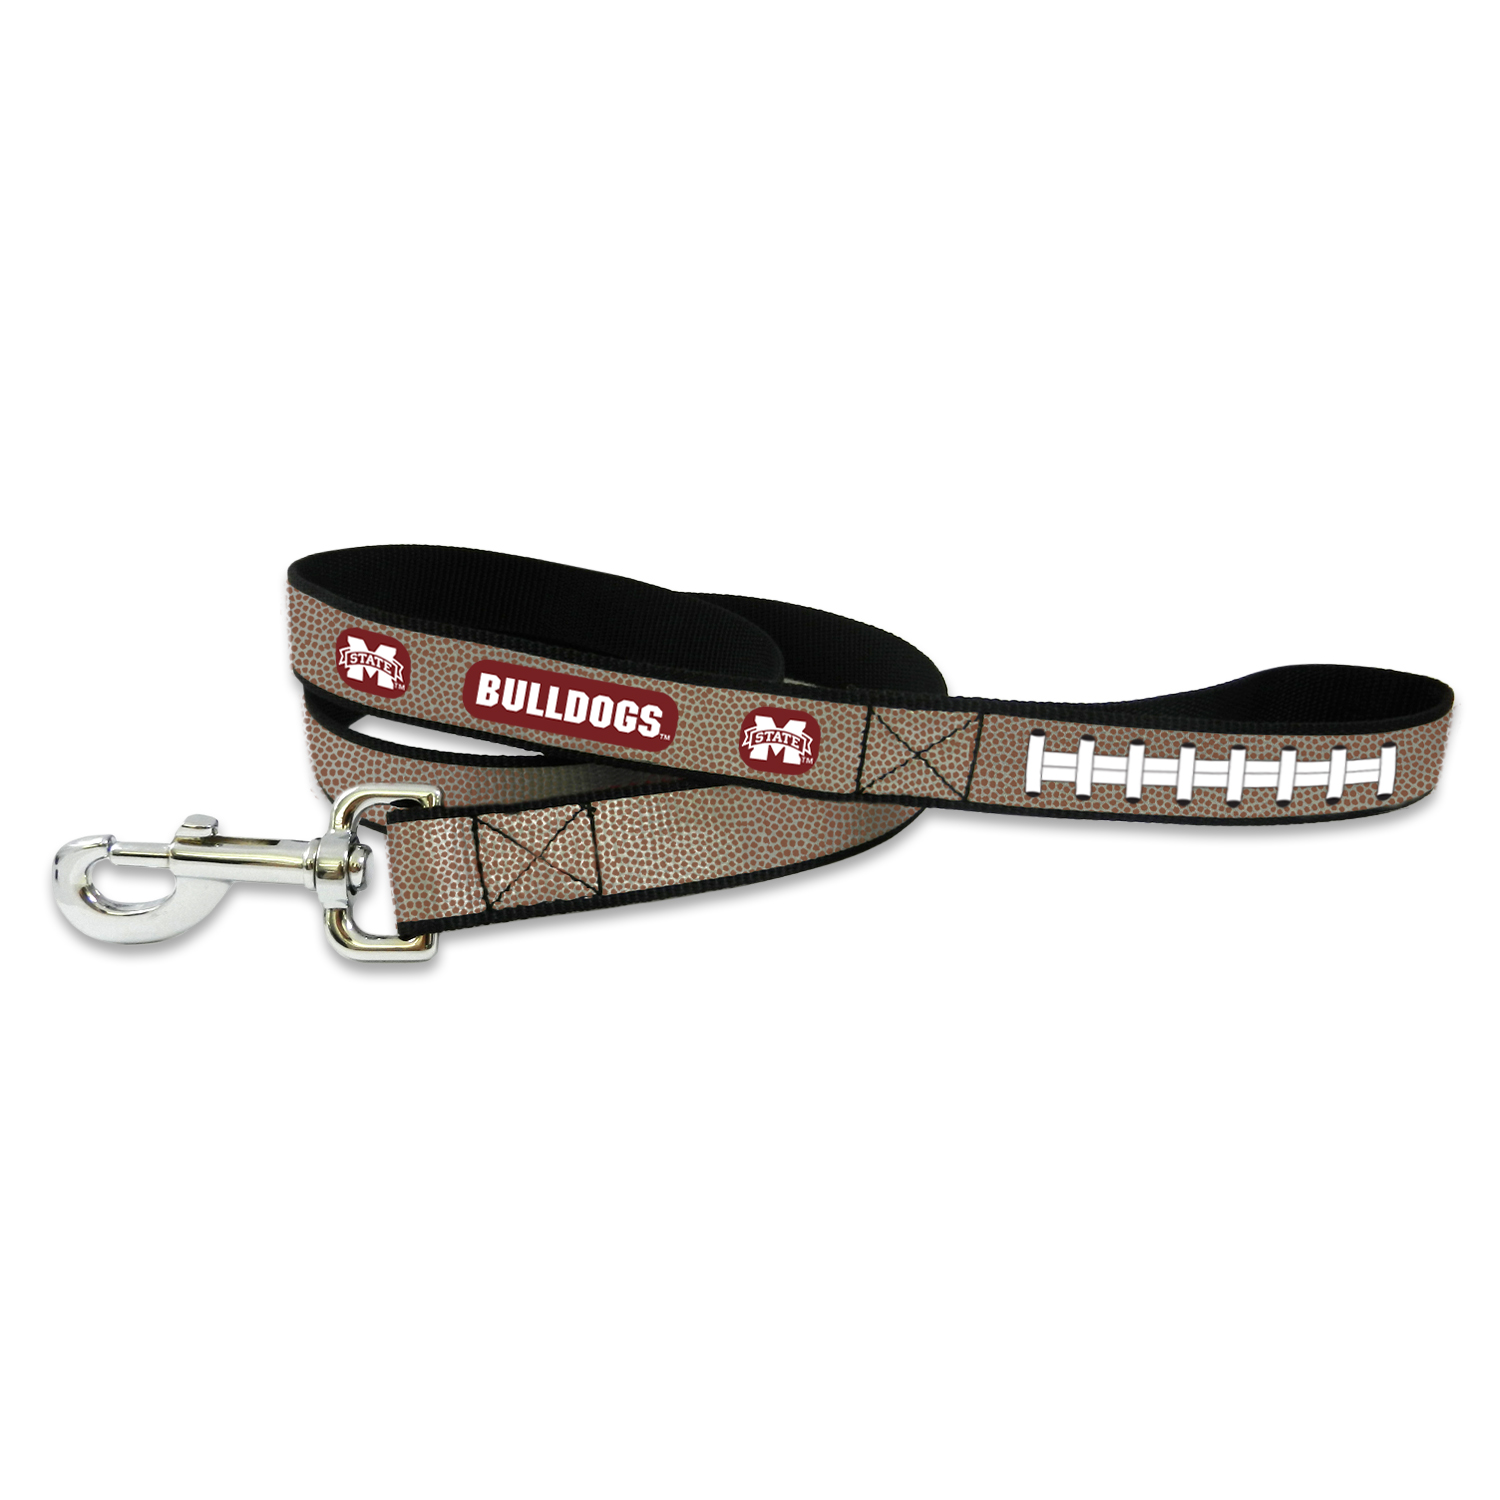 GAMEWEAR Mississippi State Bulldogs Reflective Football Leash